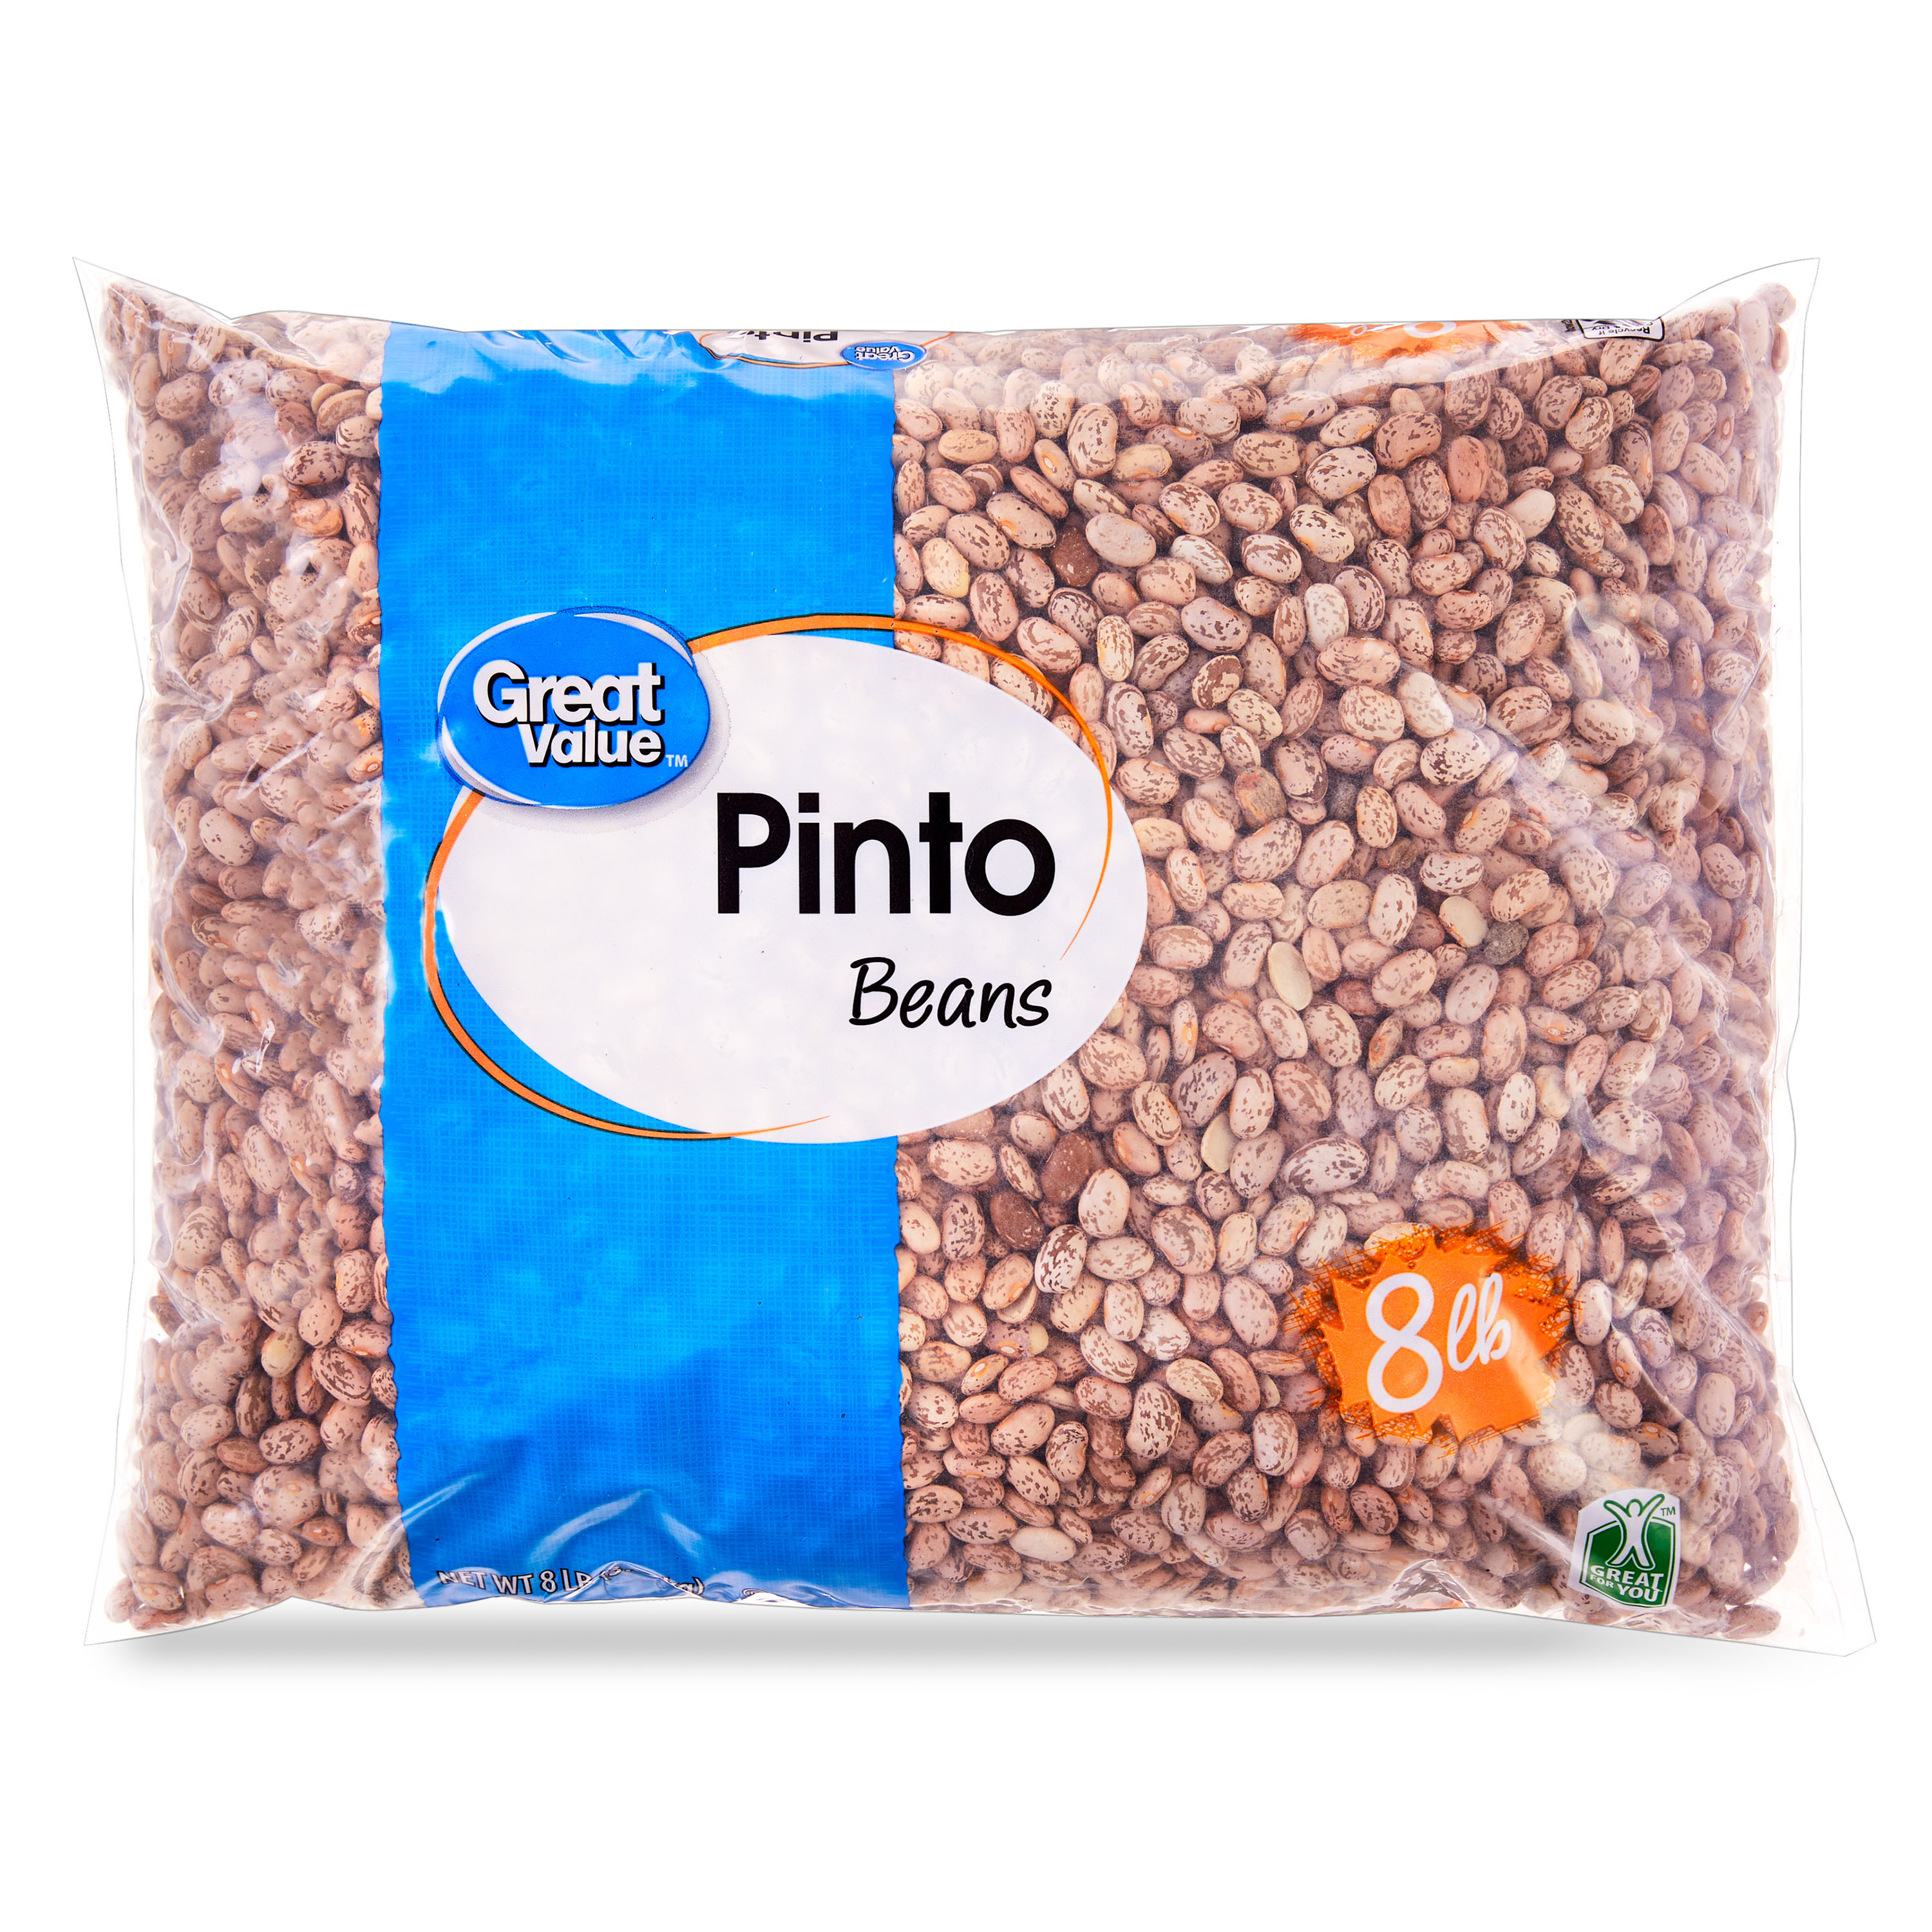 Great Value Dried Pinto Beans, 8 lb Bag - image 1 of 8